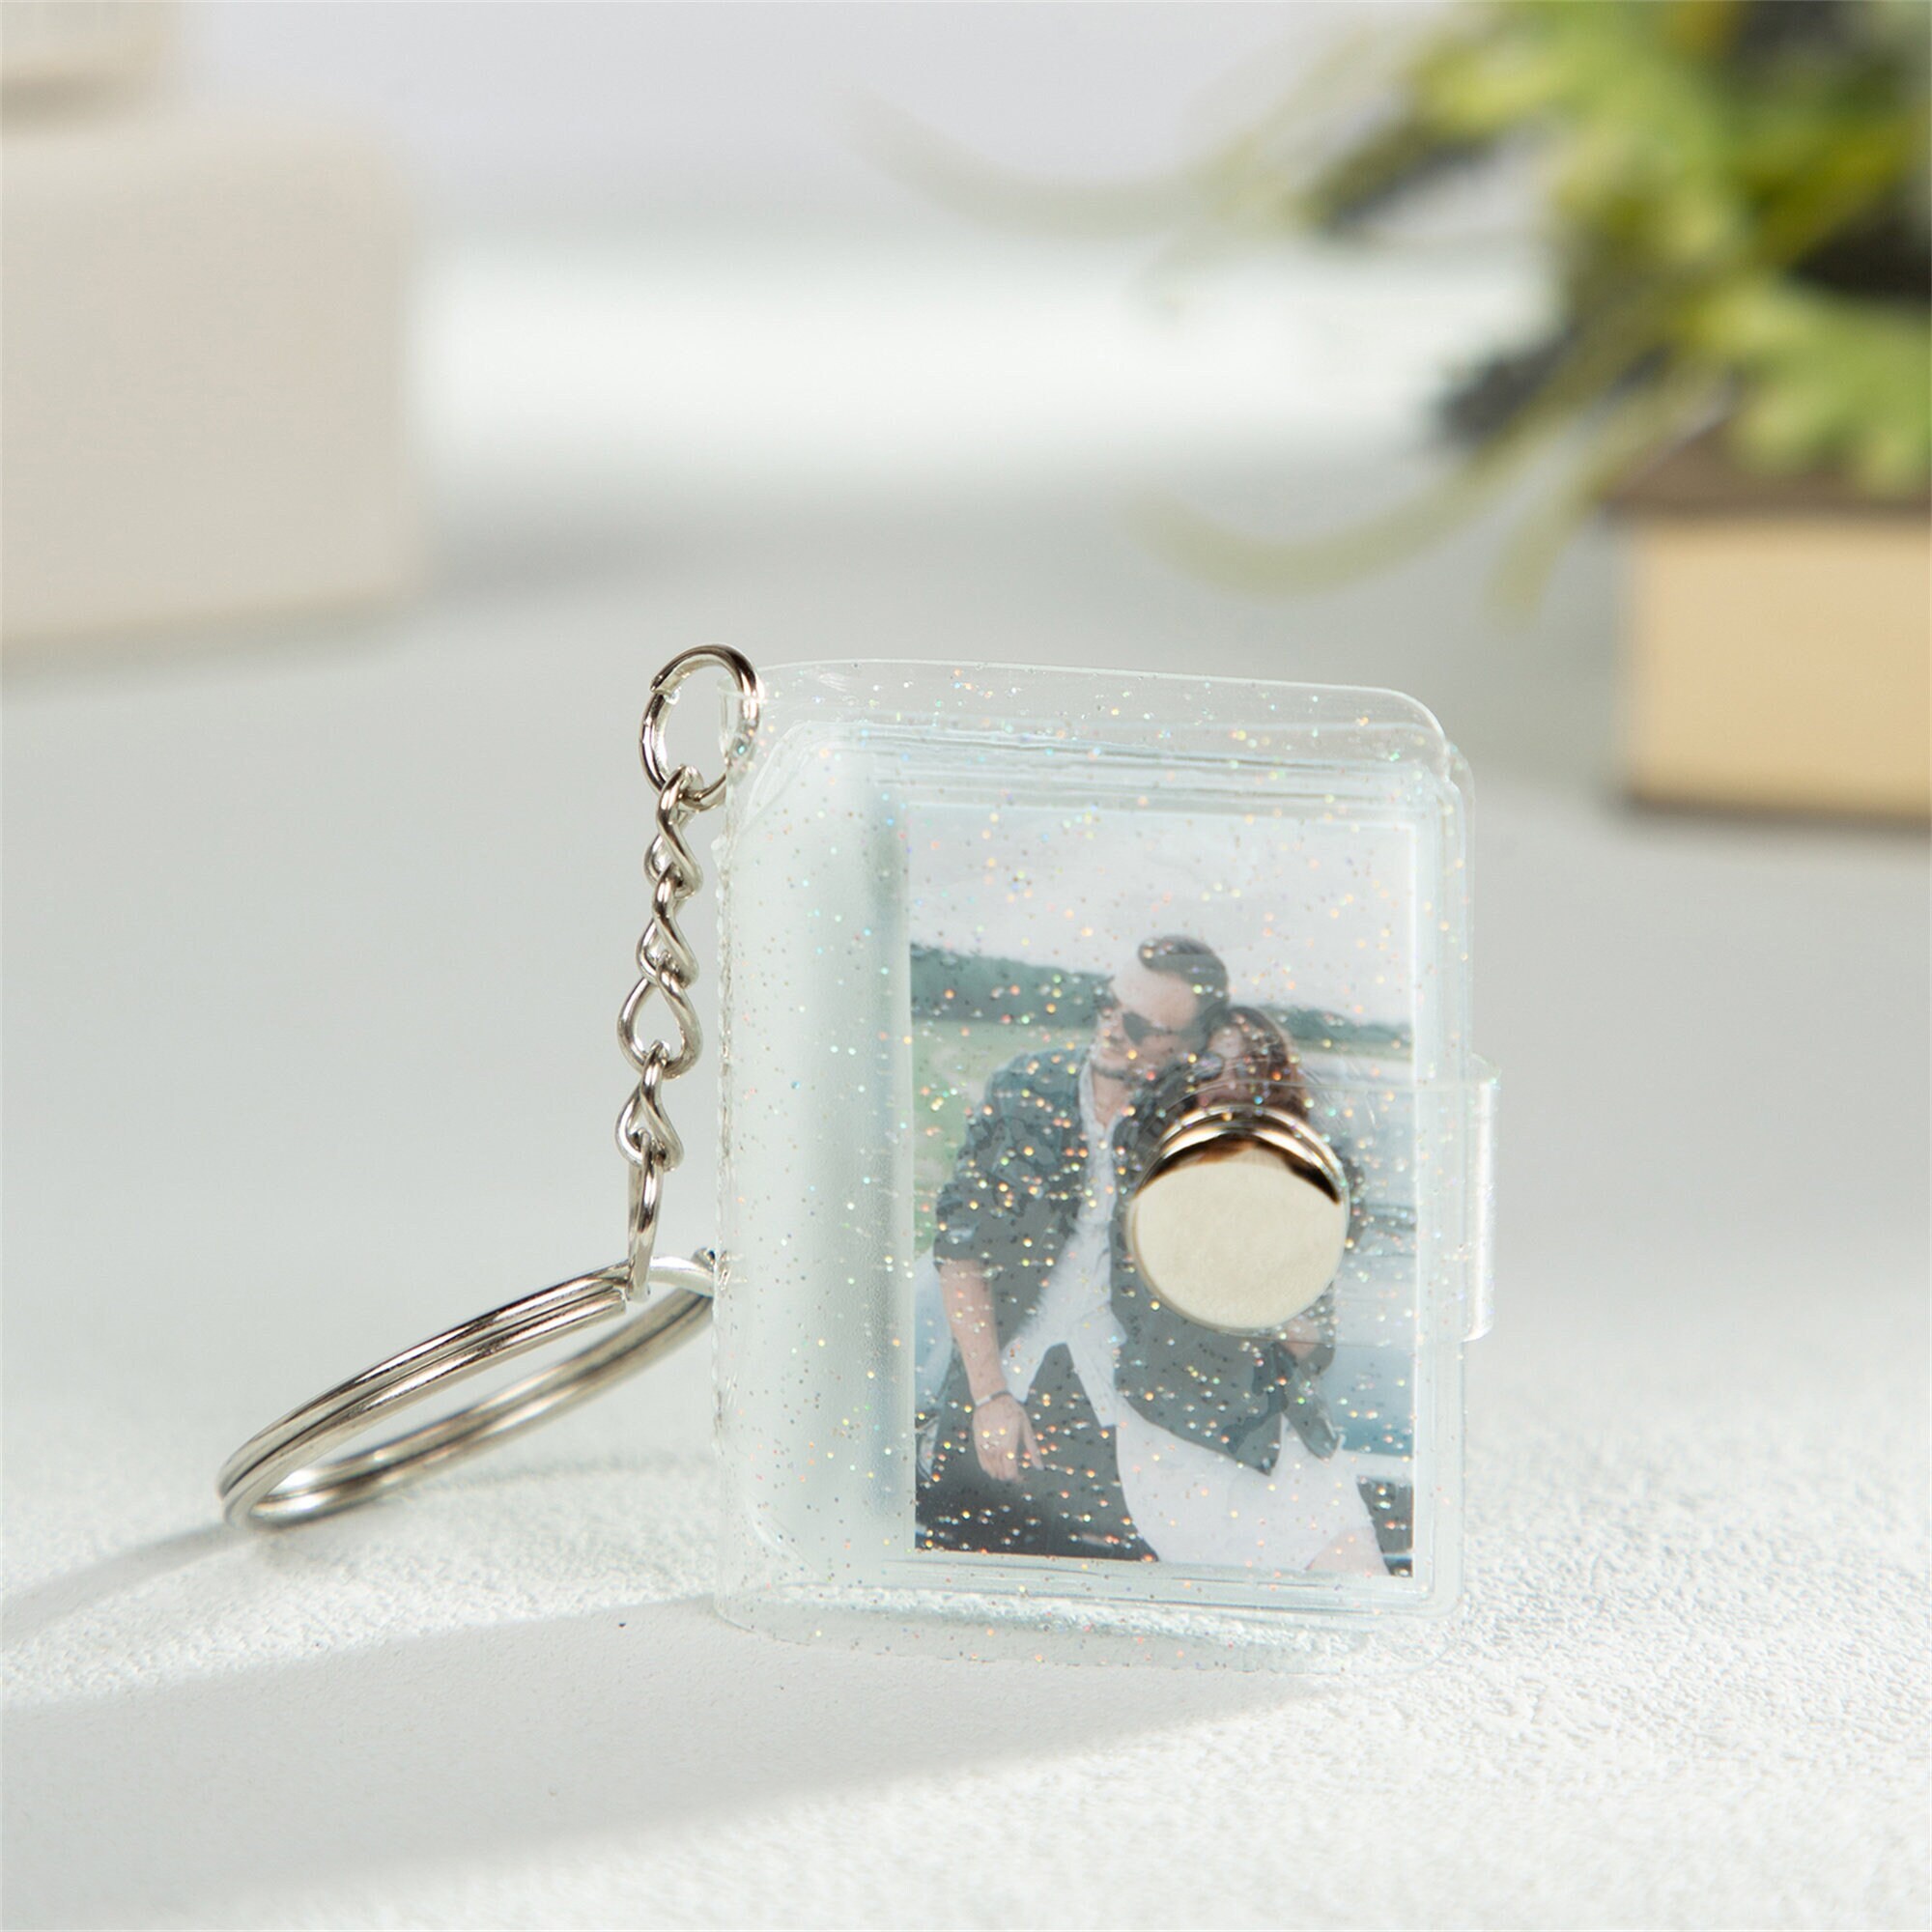 Buy Mini Book Keychain Online In India -  India